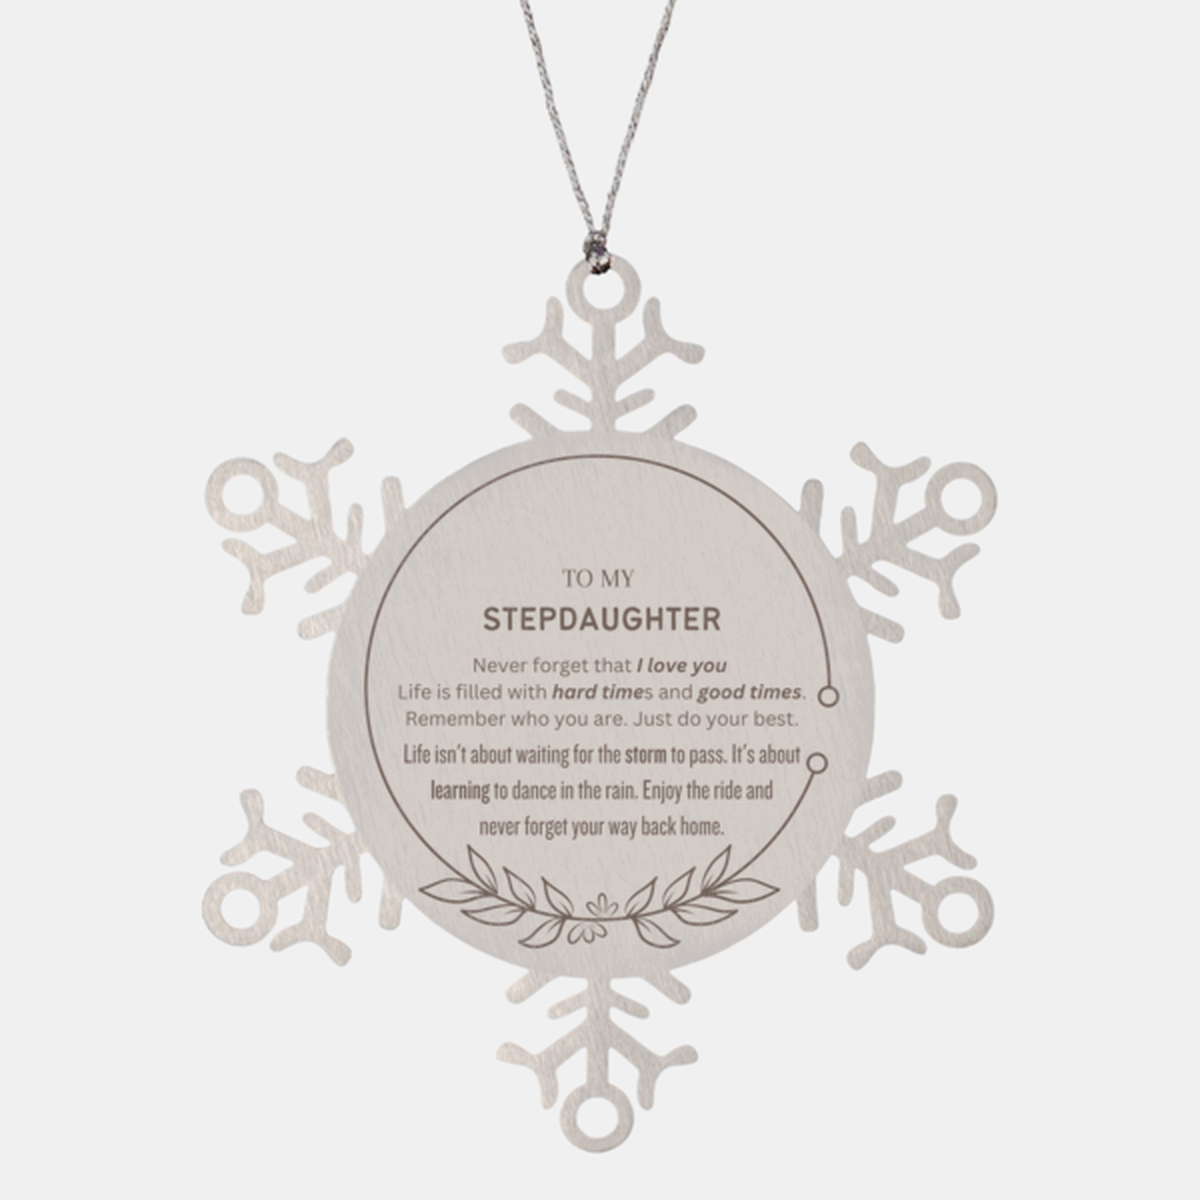 Christmas Stepdaughter Snowflake Ornament Gifts, To My Stepdaughter Thank You Gifts For Stepdaughter, Xmas Decorations Unique Gifts For Stepdaughter To My Stepdaughter Never forget that I love you life is filled with hard times and good times. Remember wh